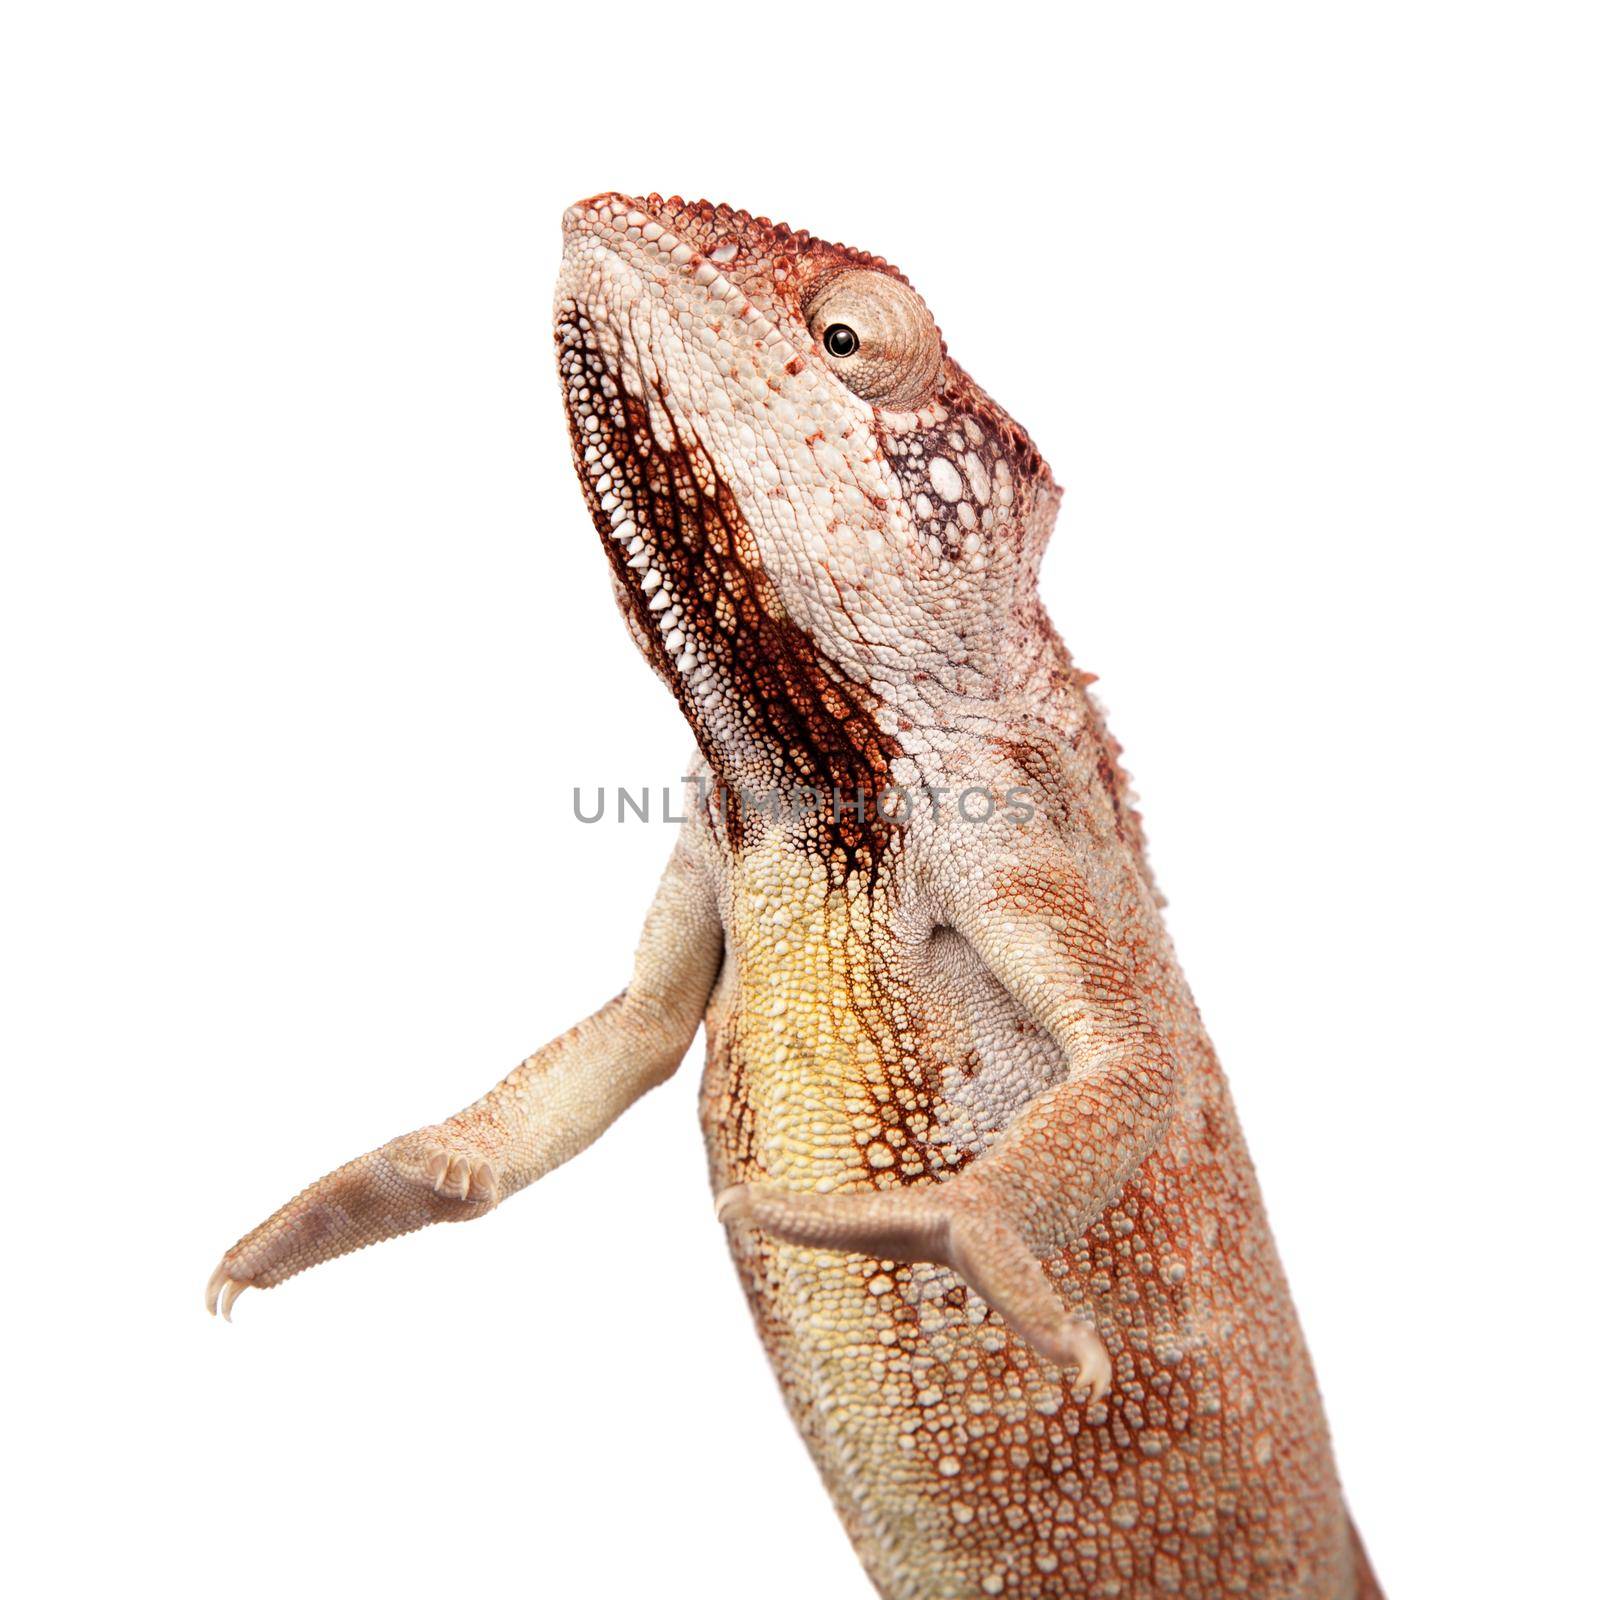 The Oustalets or Malagasy giant chameleon on white by RosaJay